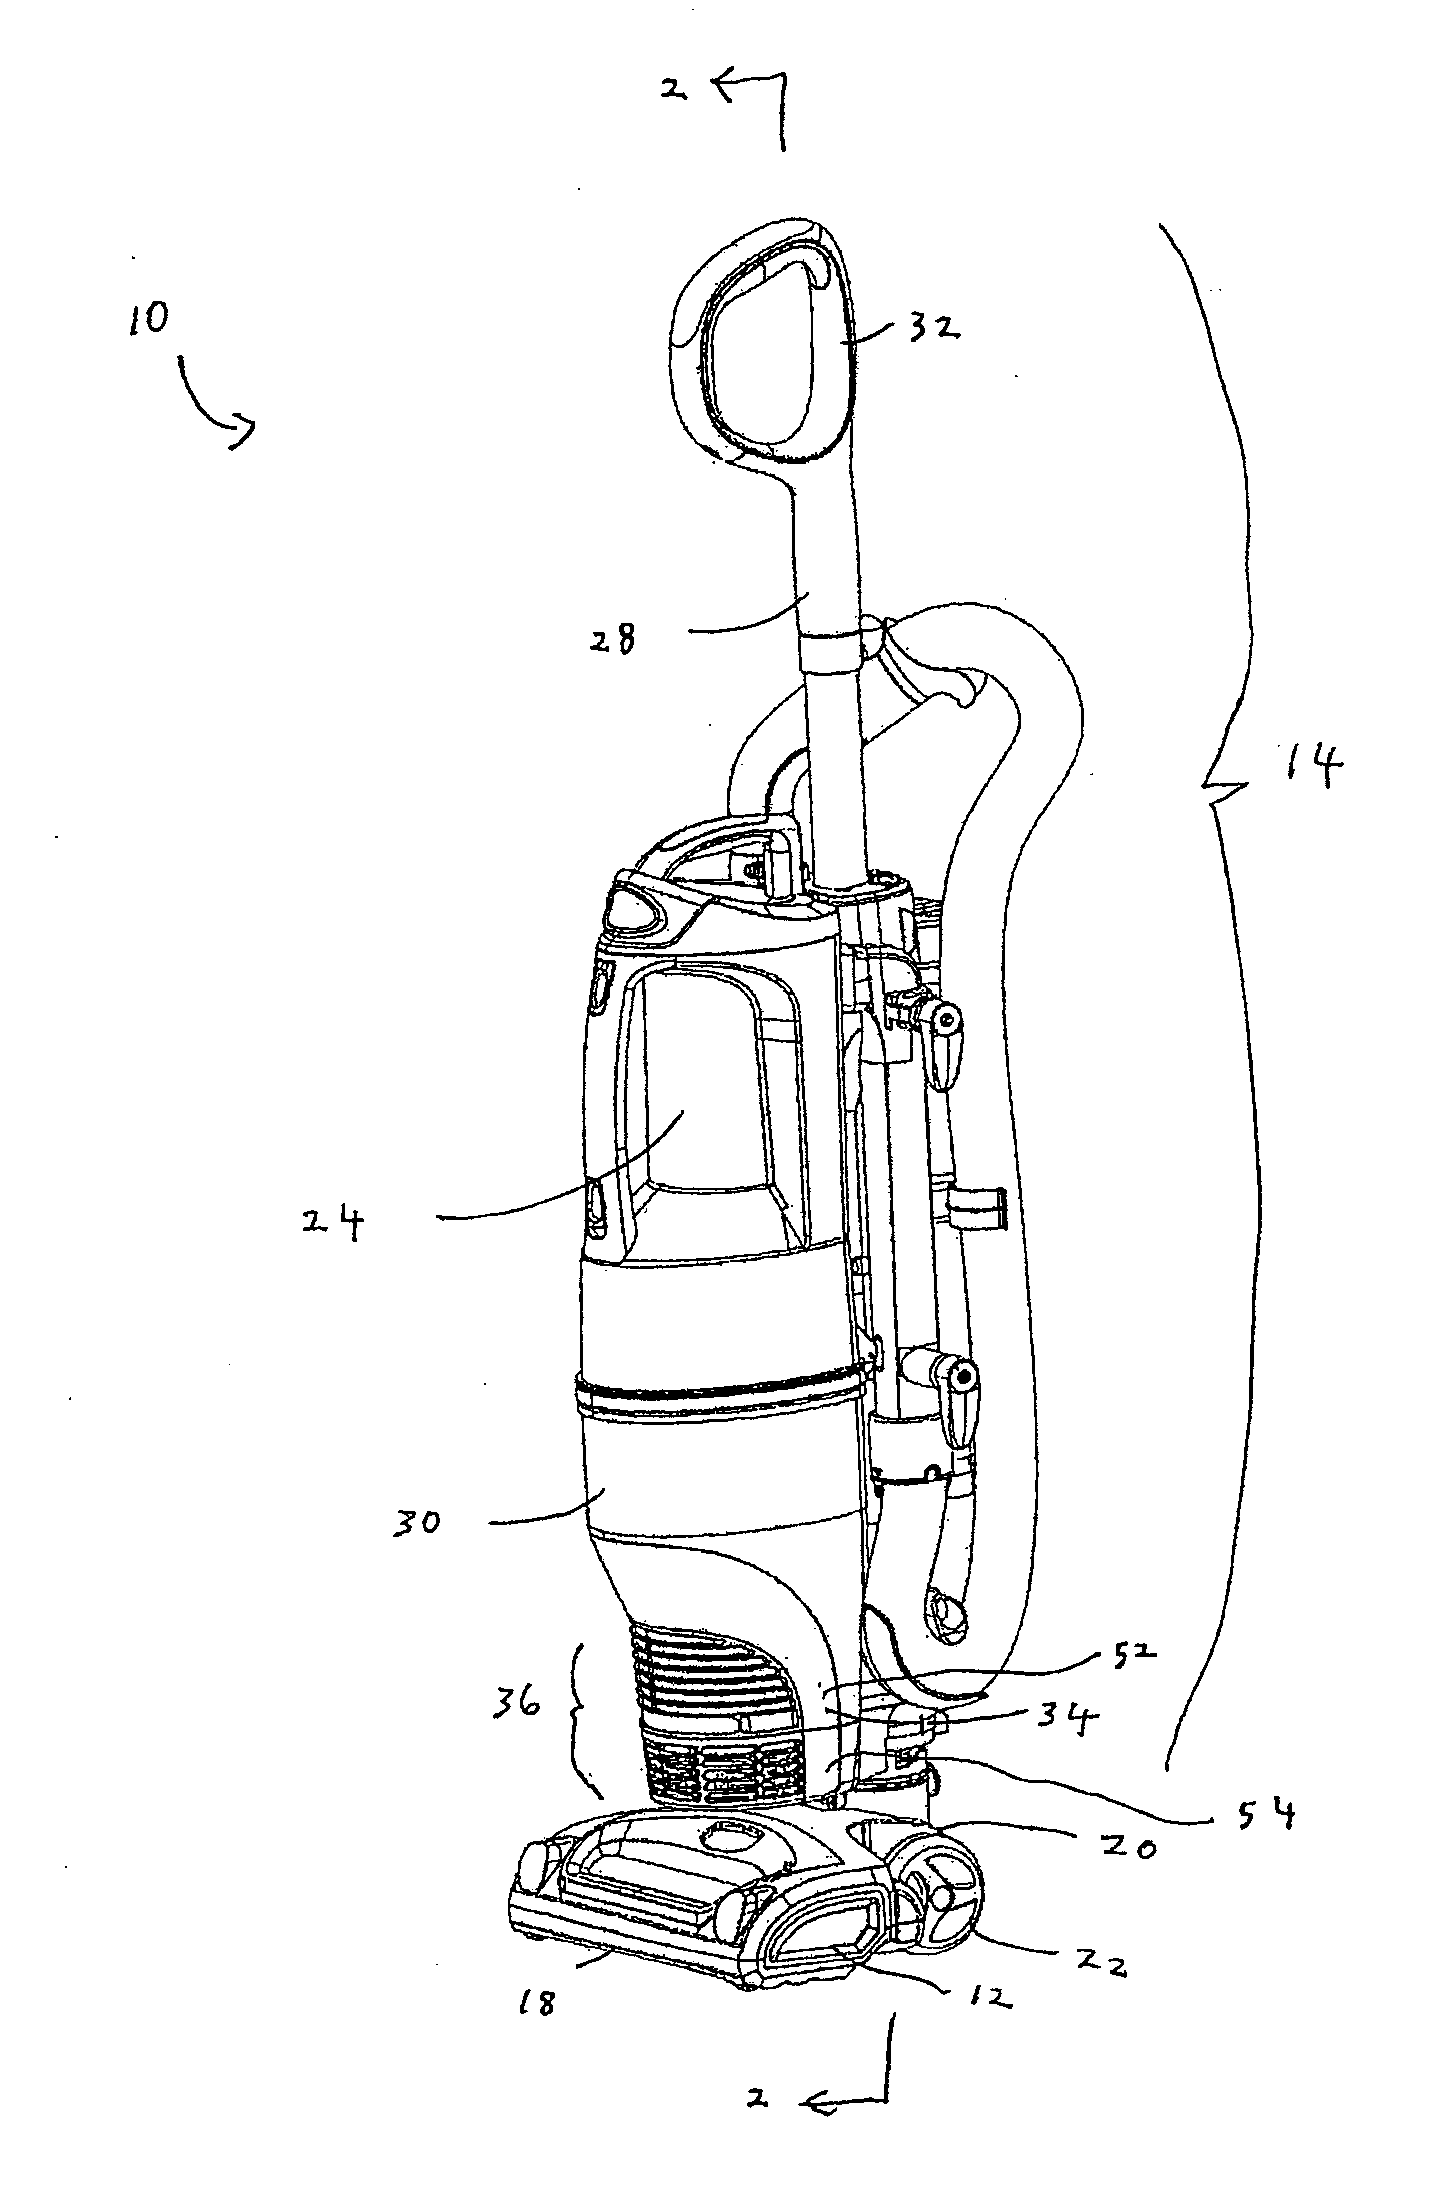 Surface cleaning apparatus with openable filter compartment